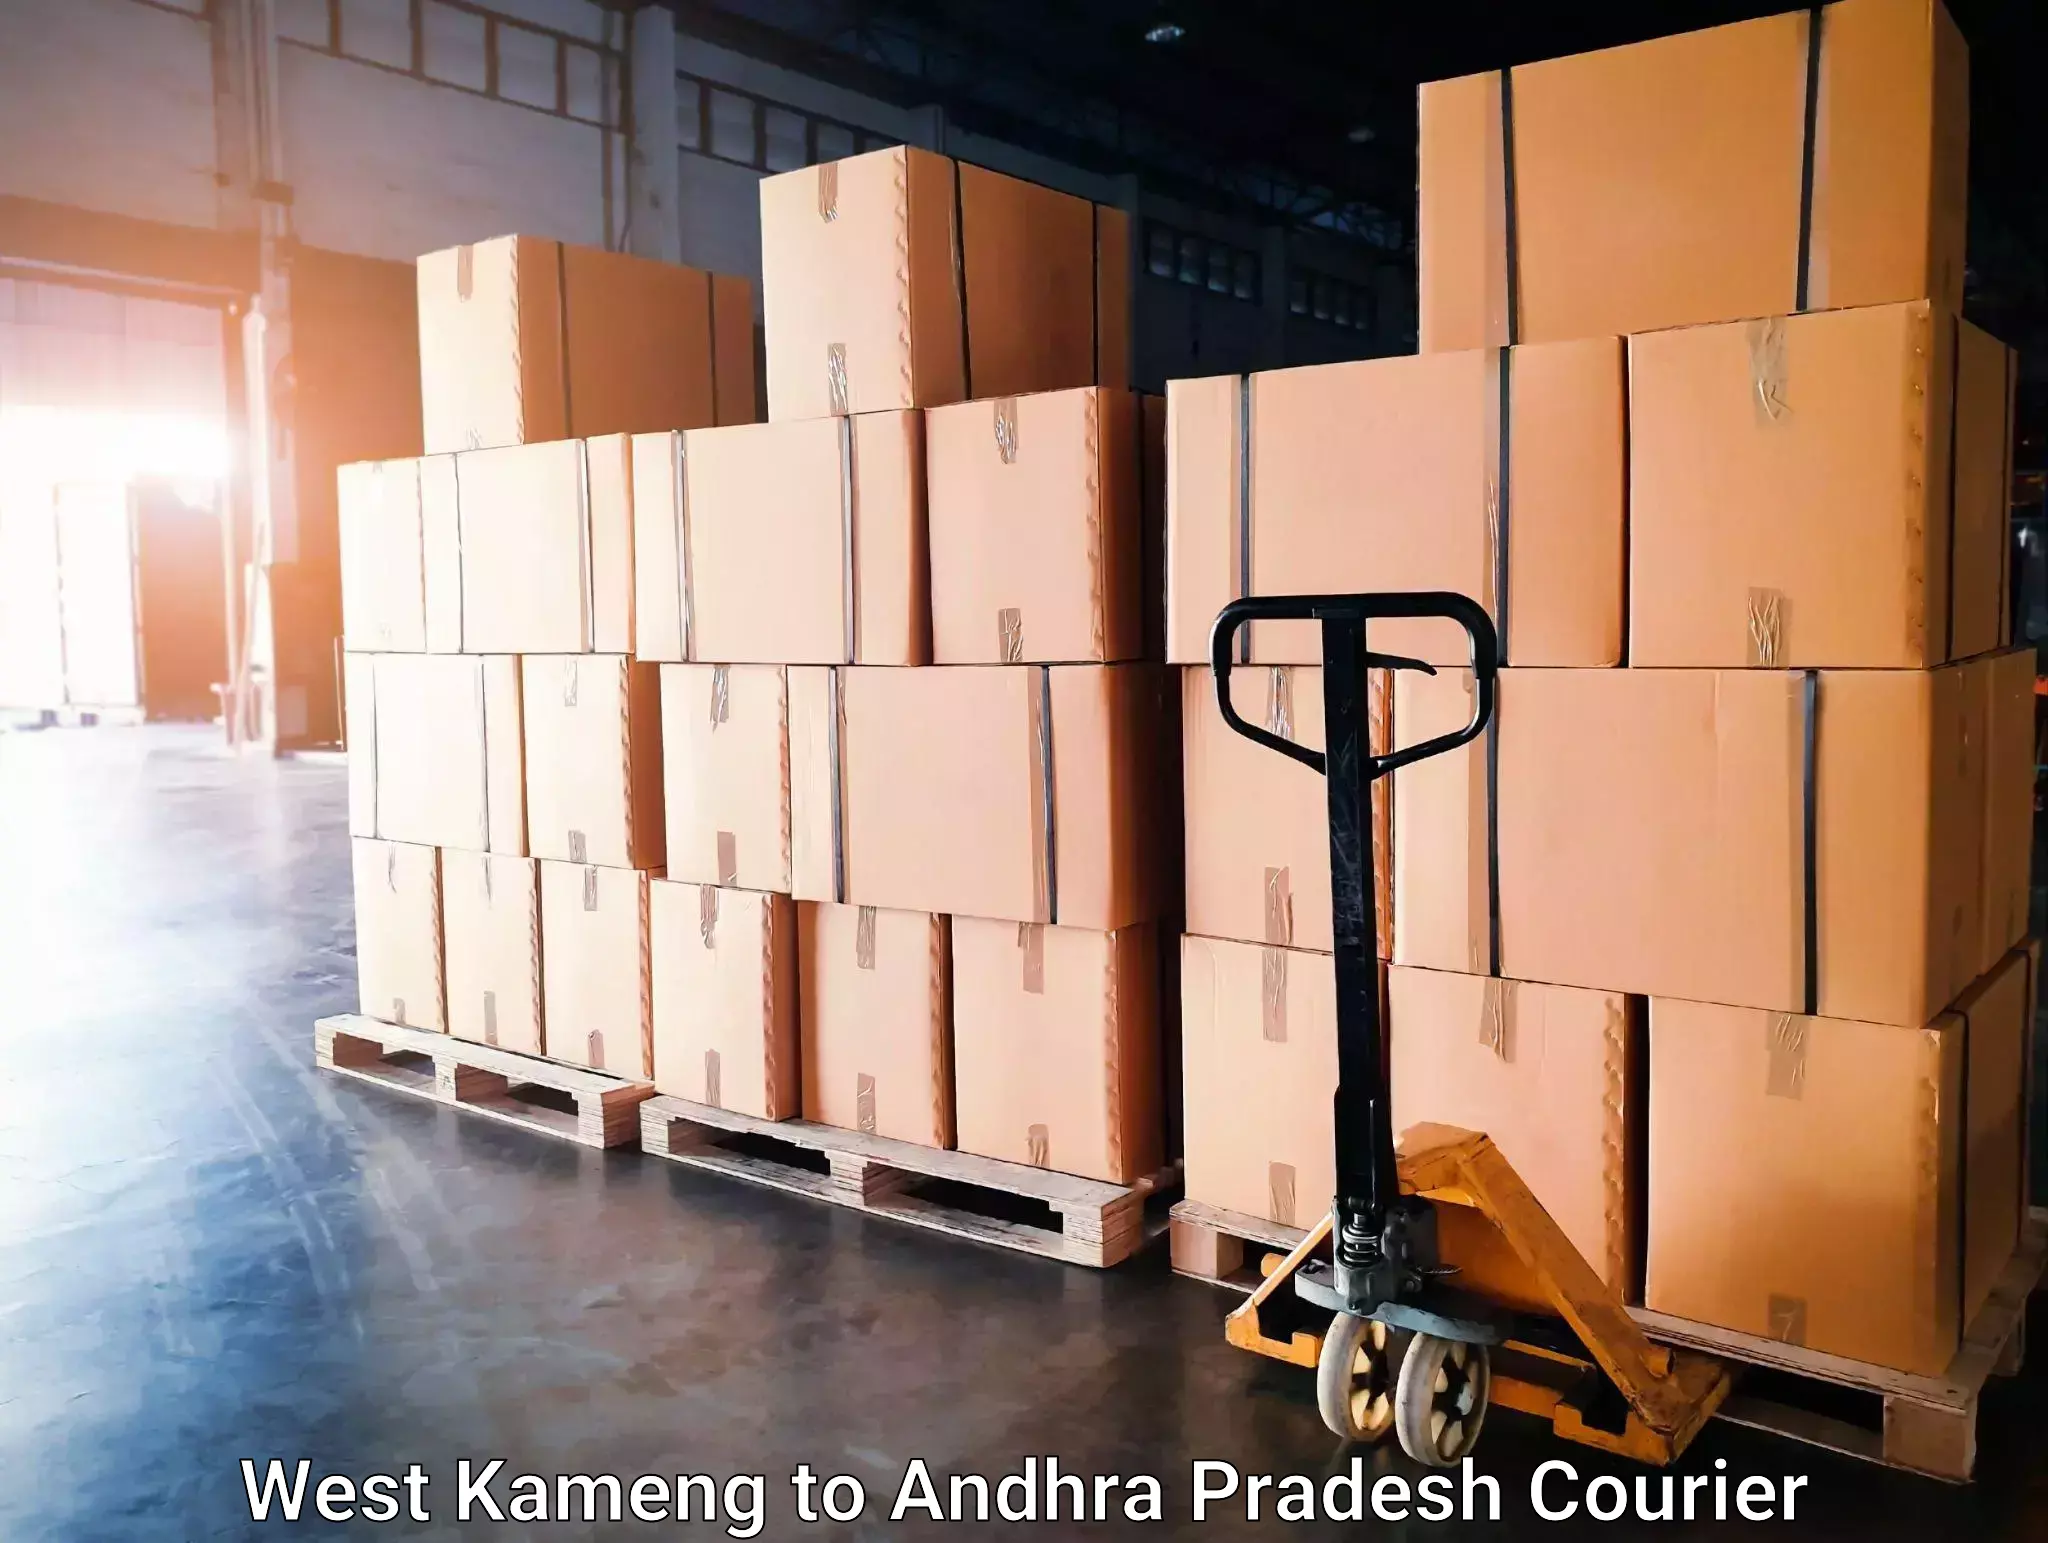 Local delivery service West Kameng to Tirupati